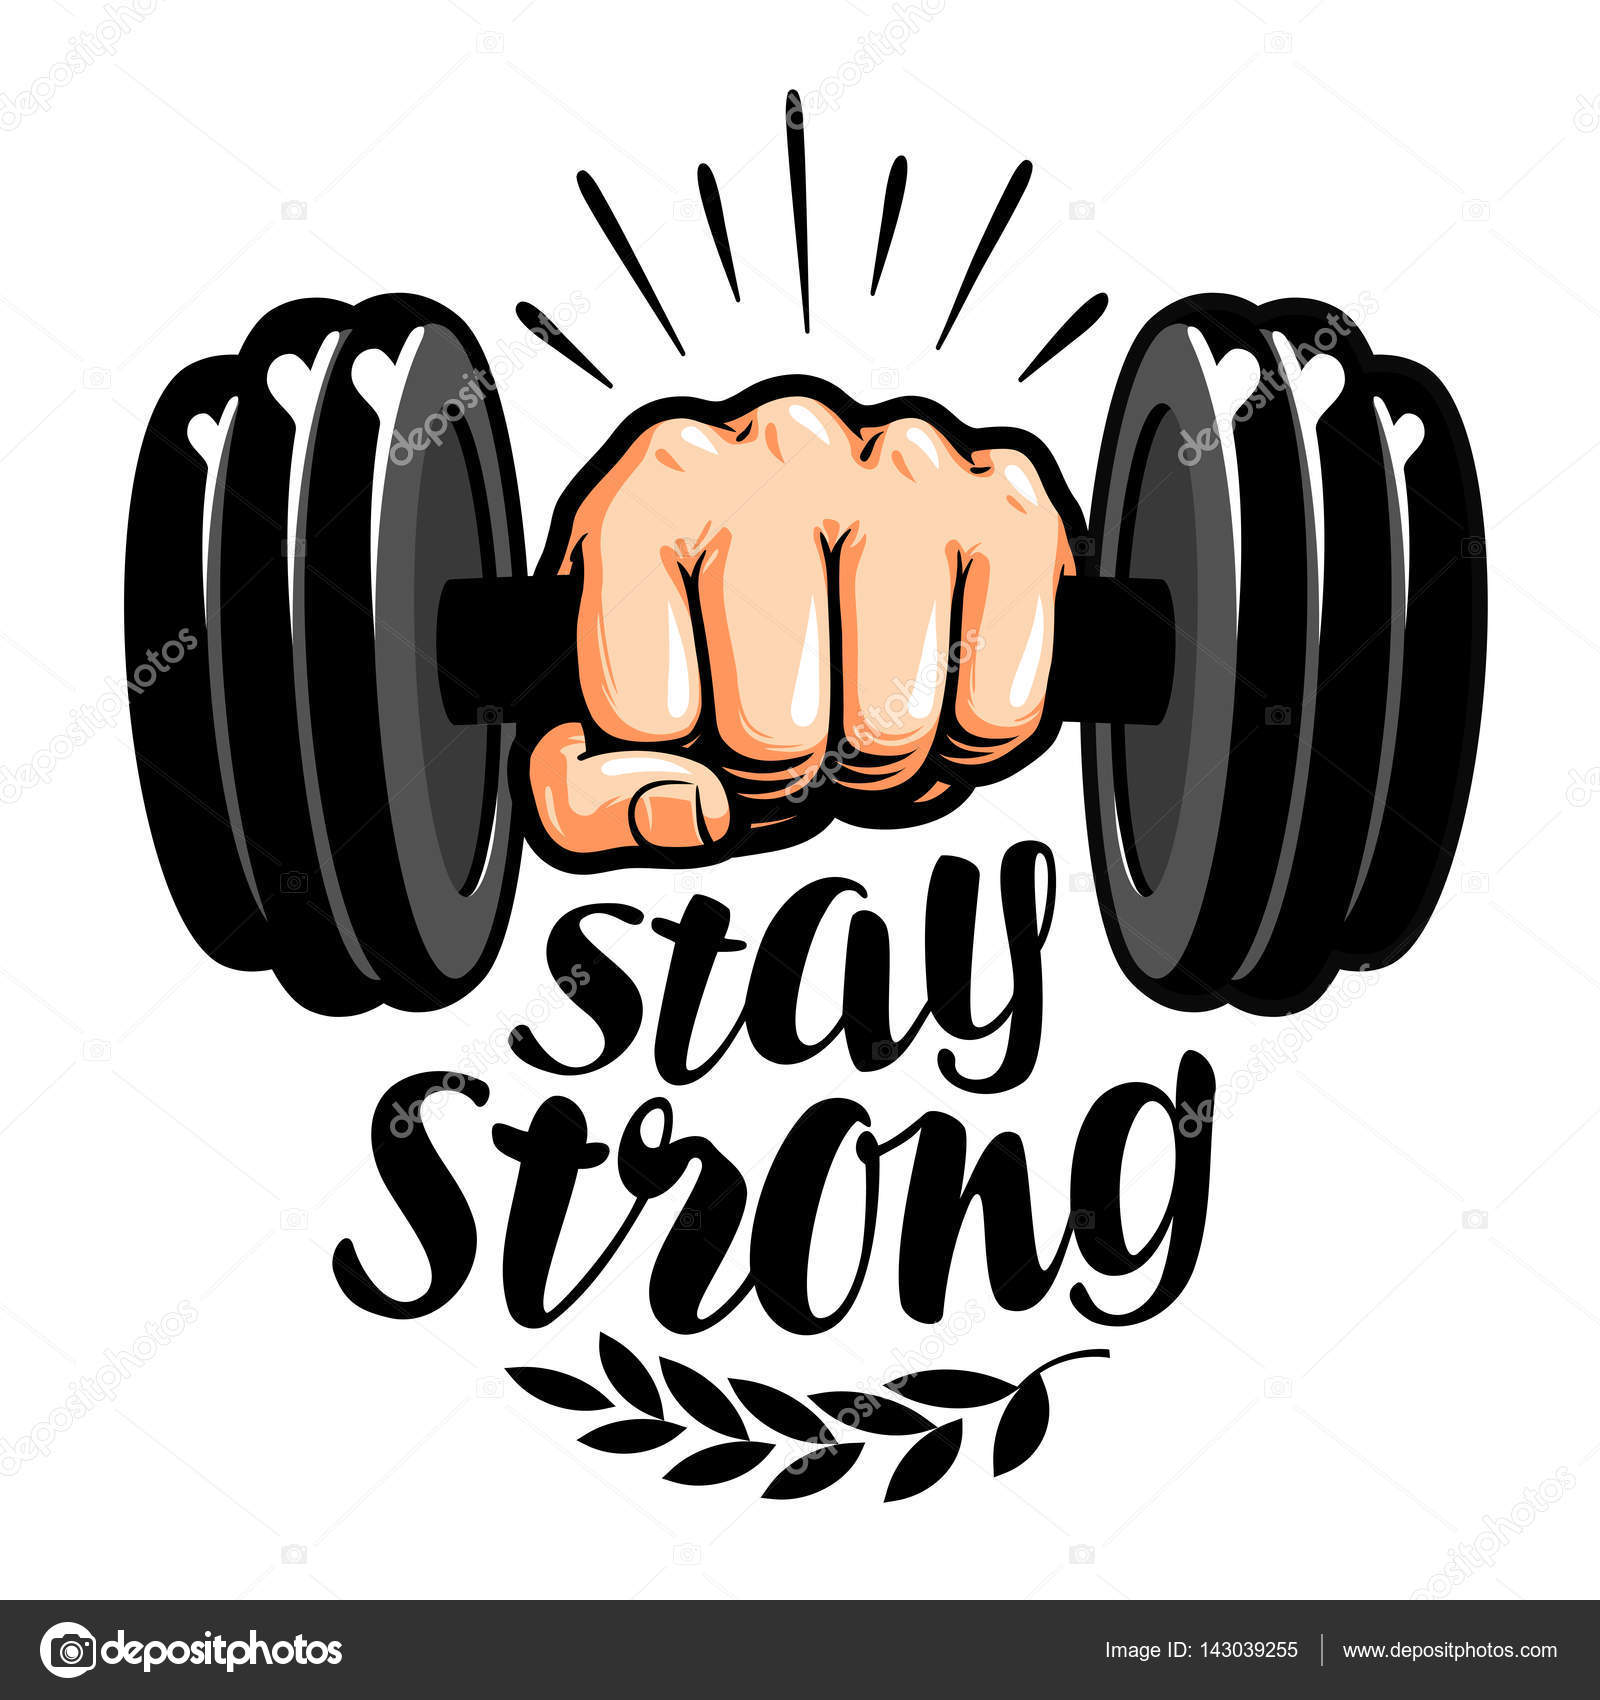 Dumbbell in hand. Stay strong, lettering. Gym, fitness label